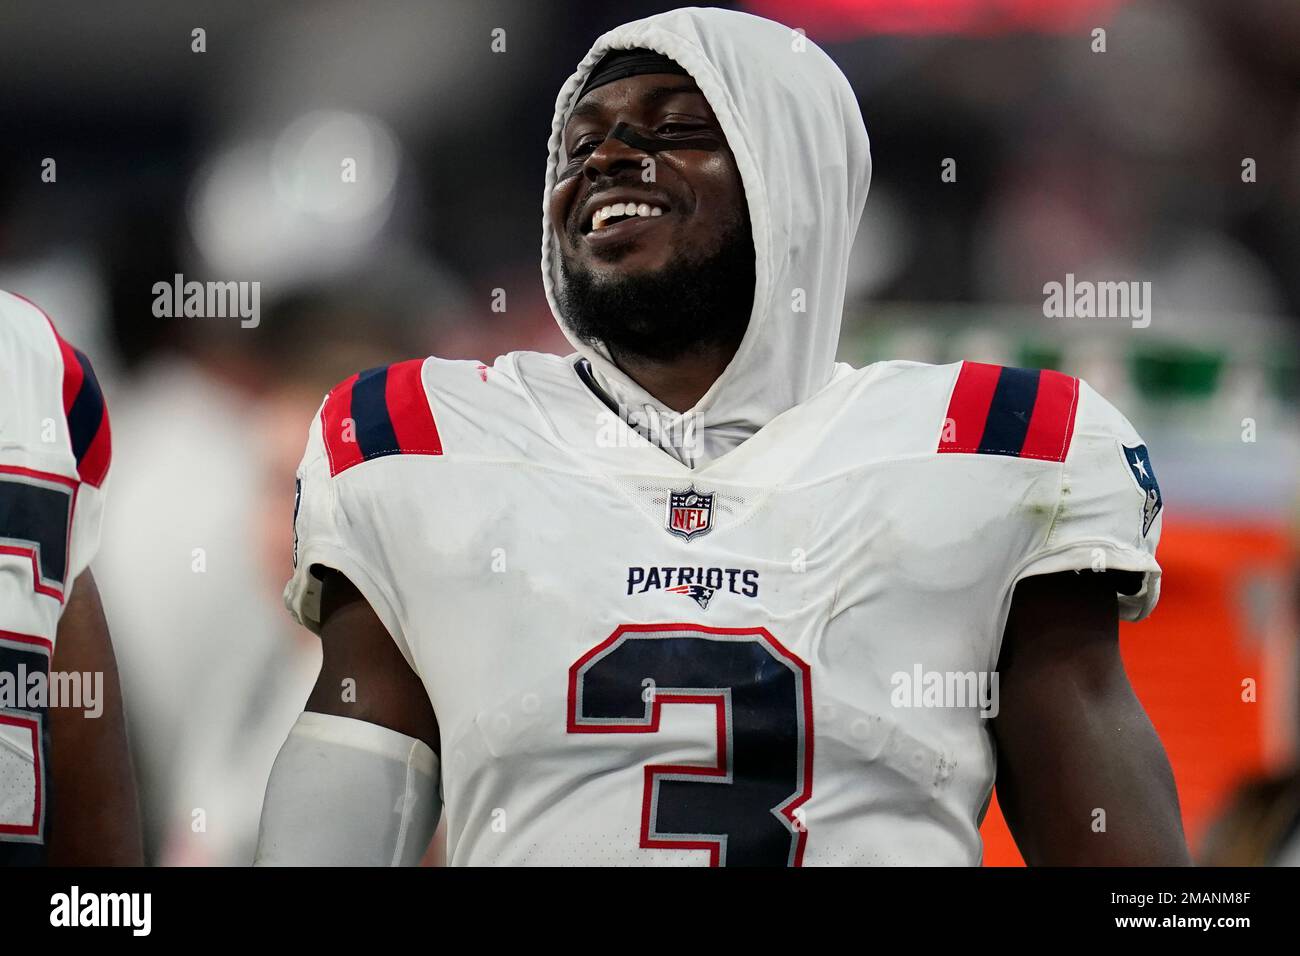 New England Patriots safety Jabrill Peppers (3) stands on the sideline  during an NFL football game against the Las Vegas Raiders Monday, Aug. 29,  2022, in Las Vegas, Nevada. (AP Photo/Ashley Landis